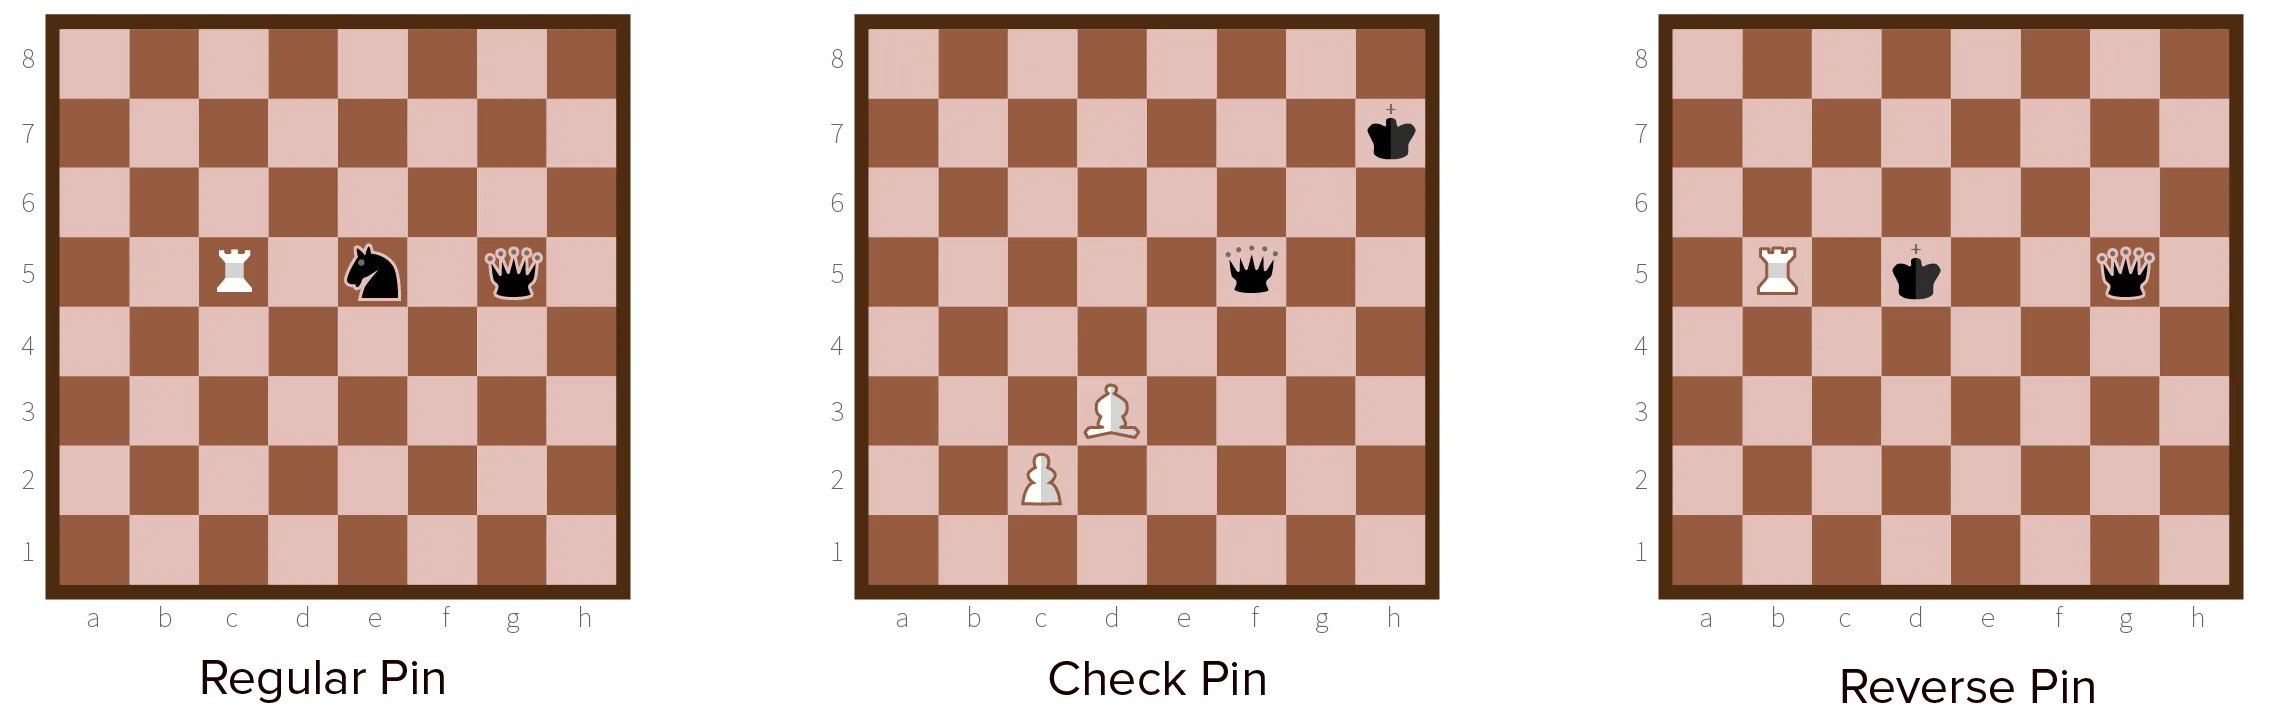 Example of pinning double attack in chess.